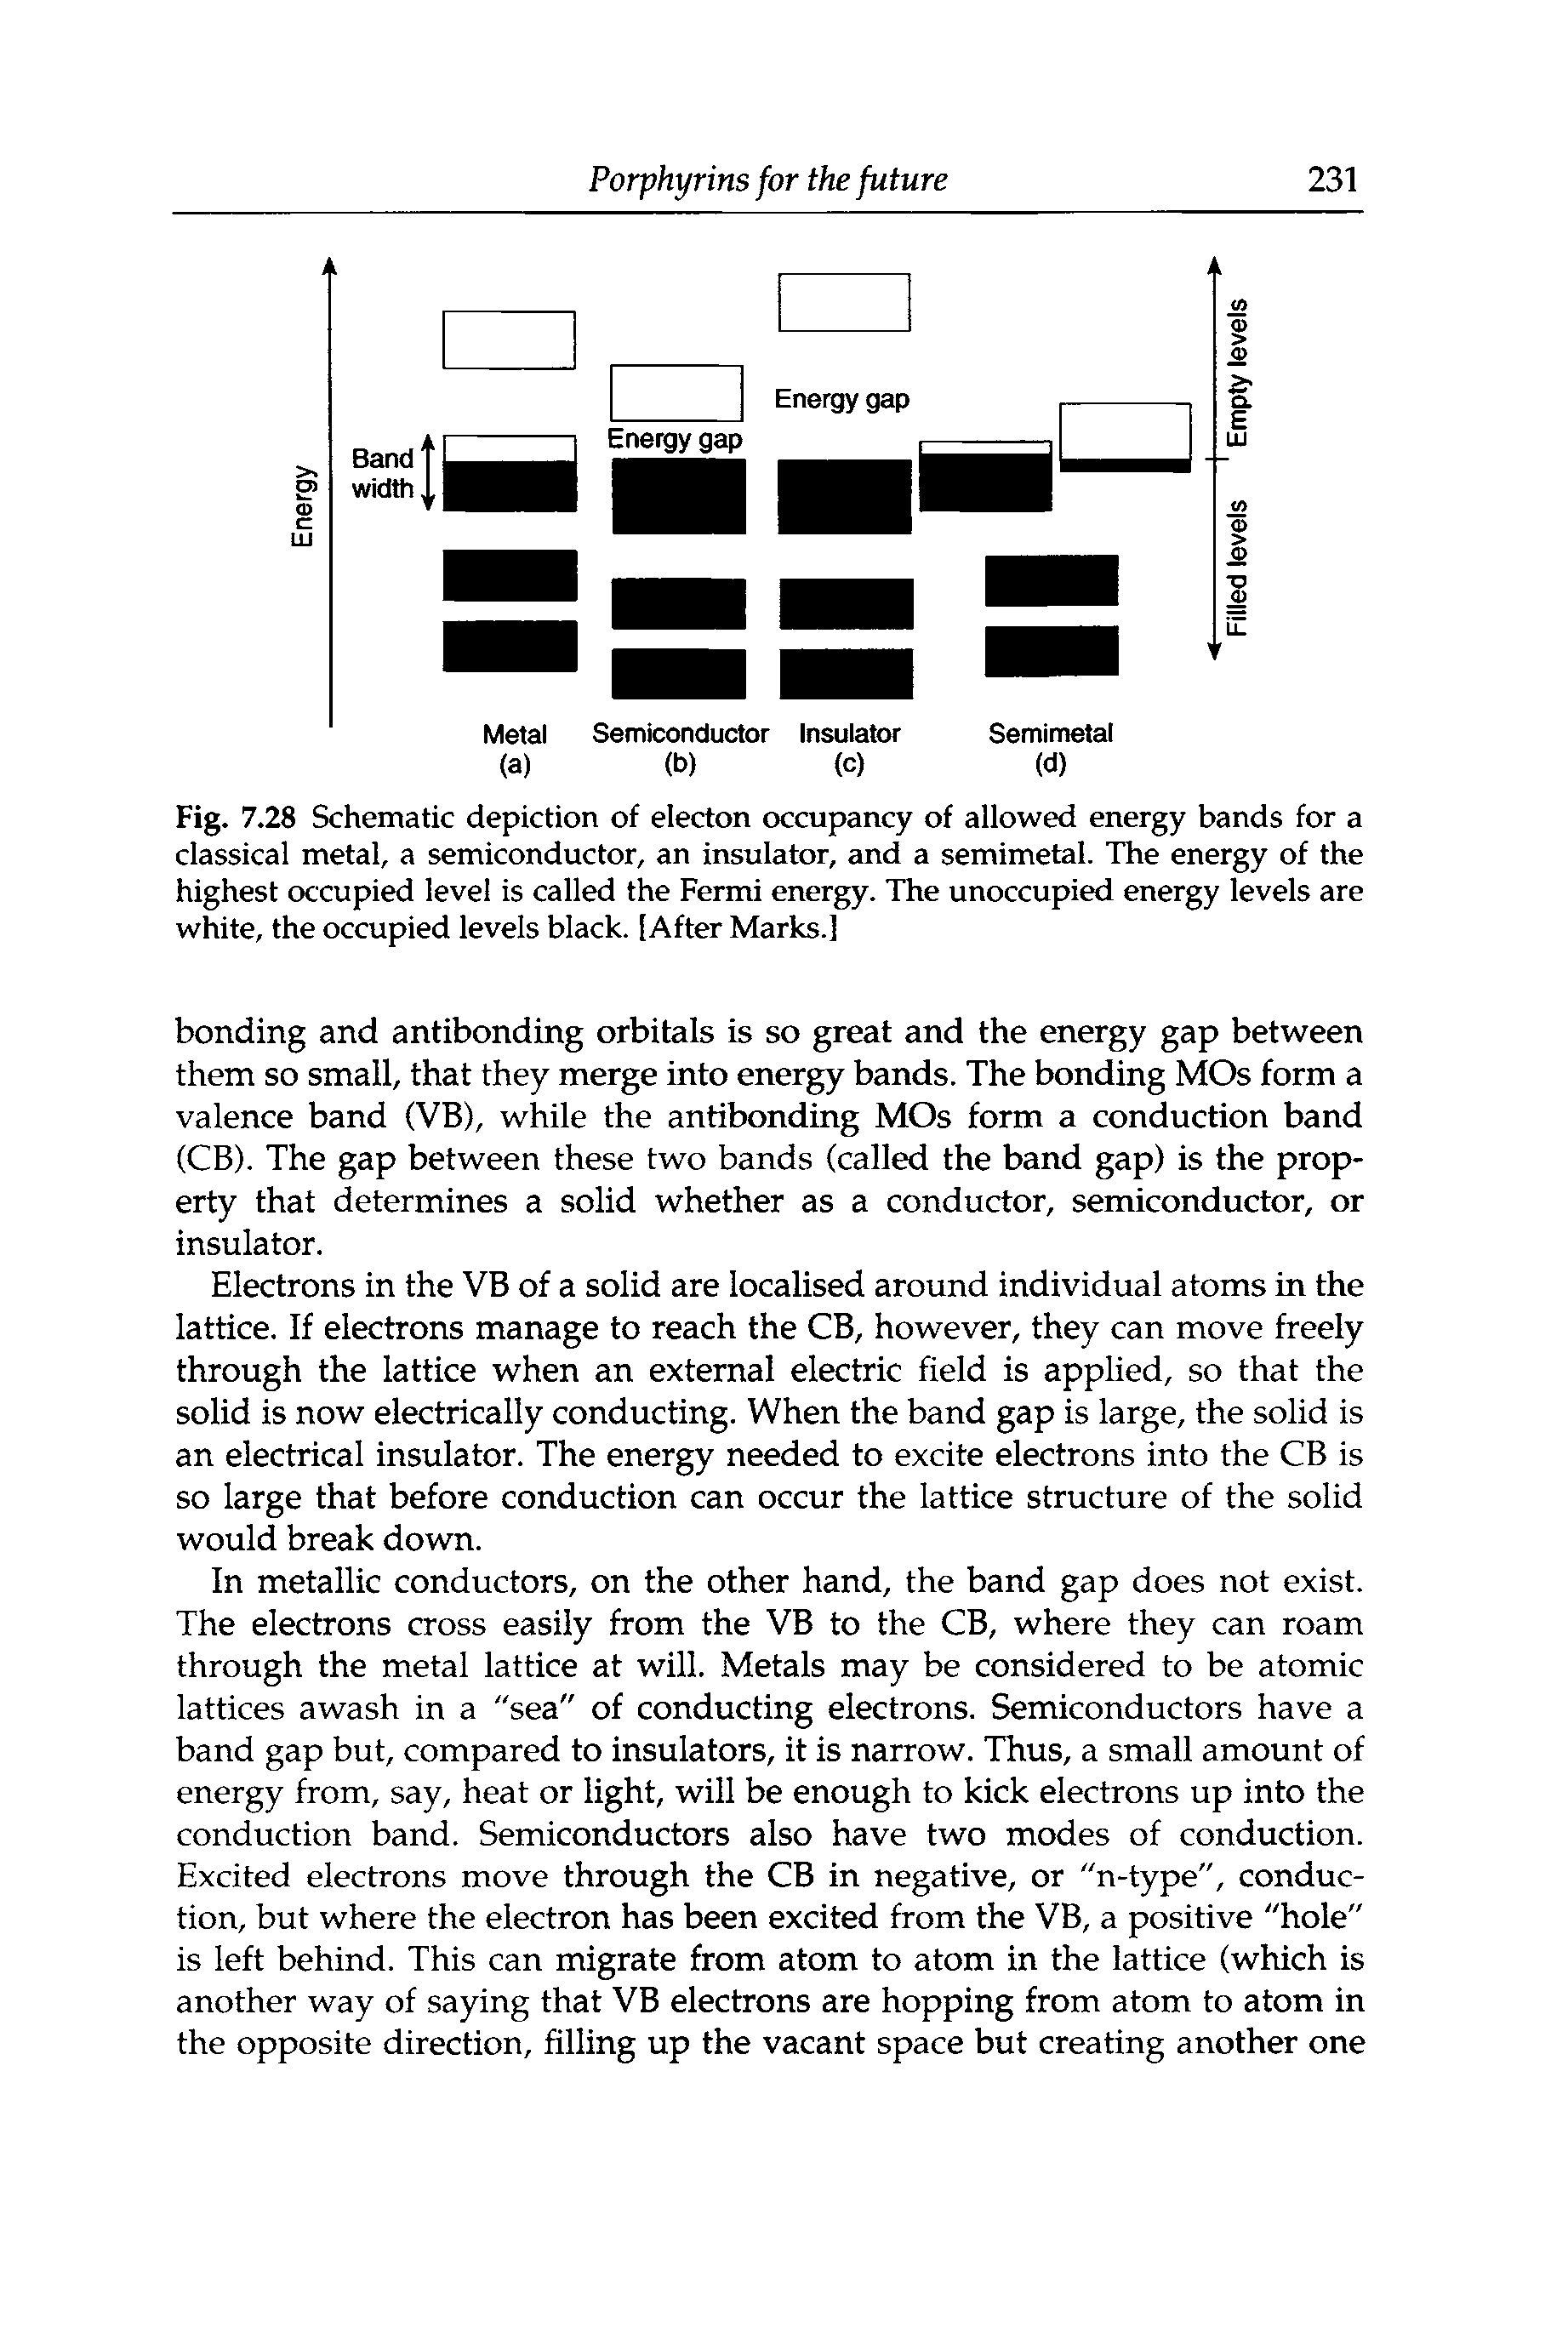 Fig. 7.28 Schematic depiction of electon occupancy of allowed energy bands for a classical metal, a semiconductor, an insulator, and a semimetal. The energy of the highest occupied level is called the Fermi energy. The unoccupied energy levels are white, the occupied levels black. [After Marks.]...